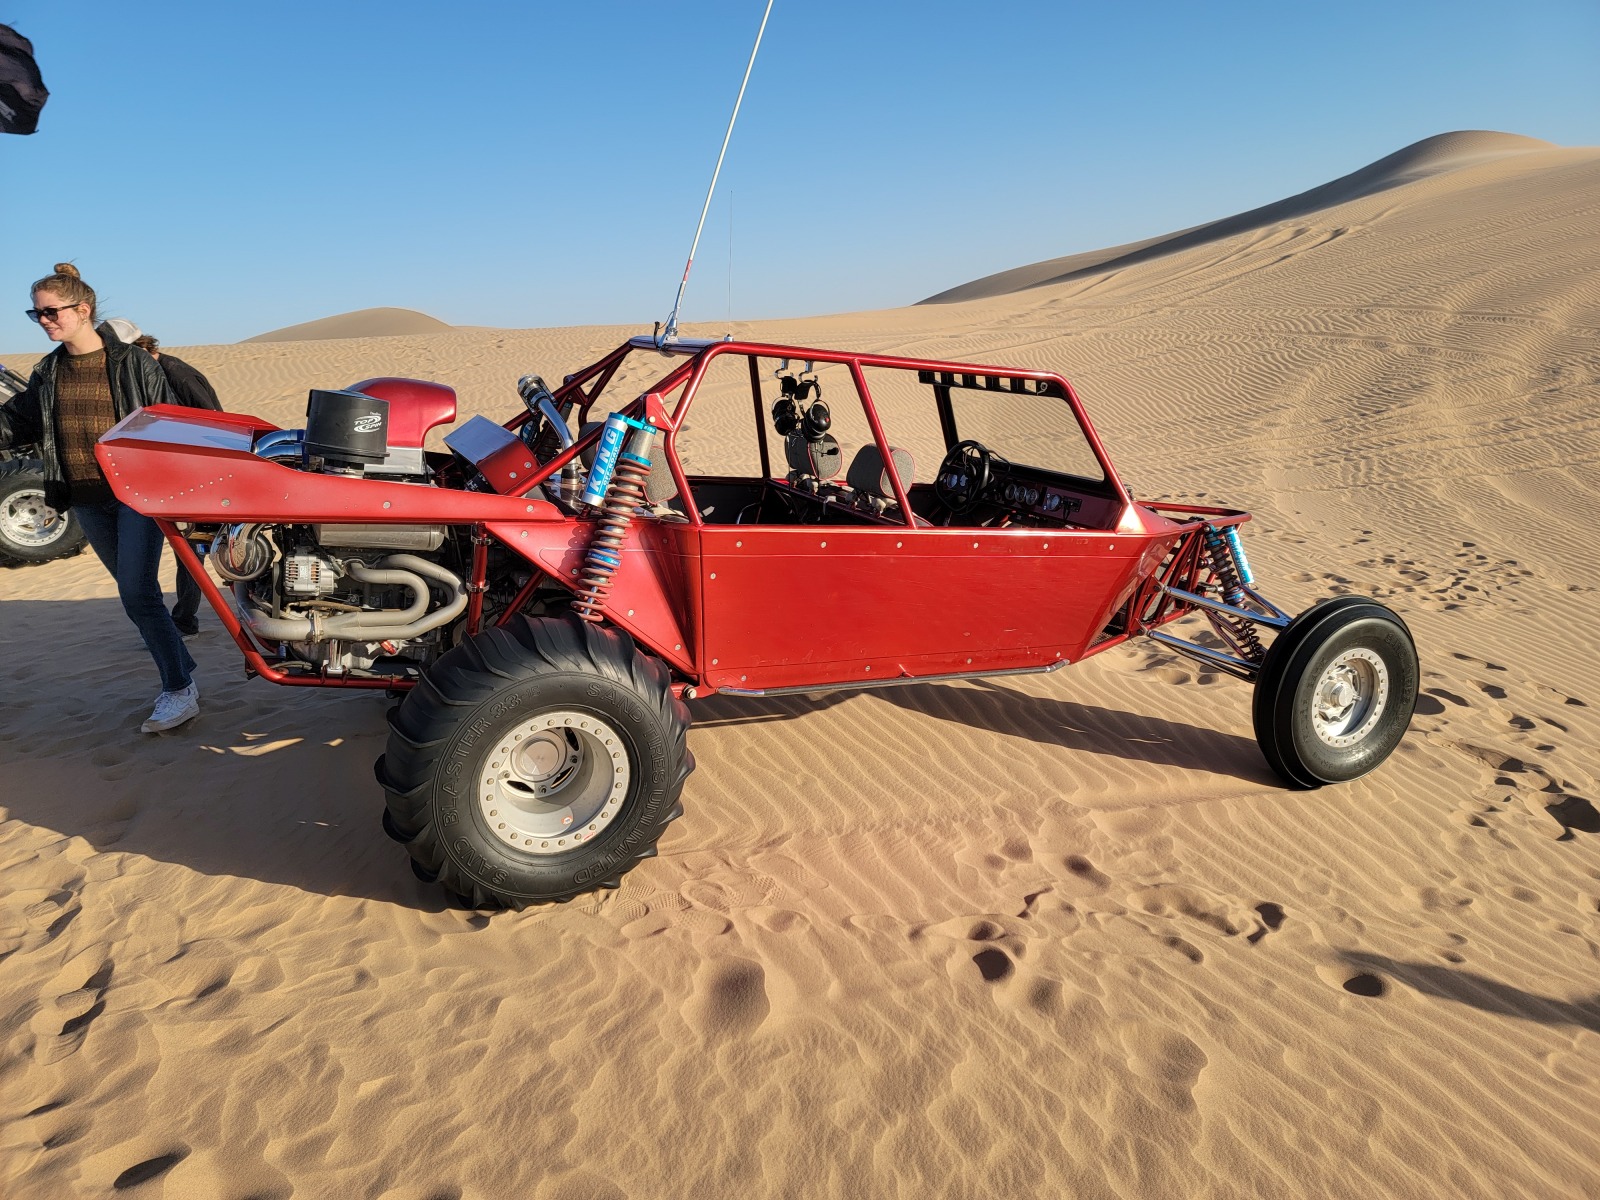 For Sale: 2005 Sand Car Unlimited Little Bro  - photo2